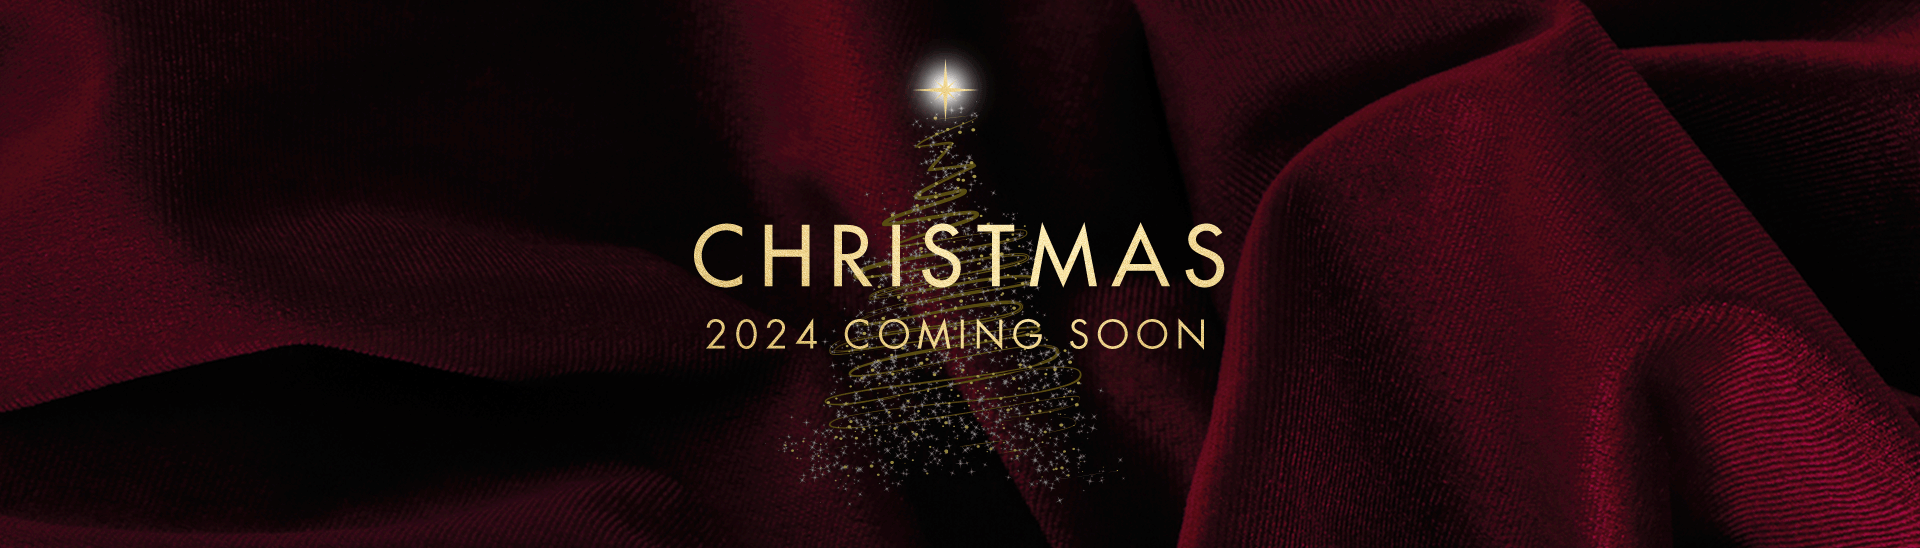 Christmas 2024 at Exeter